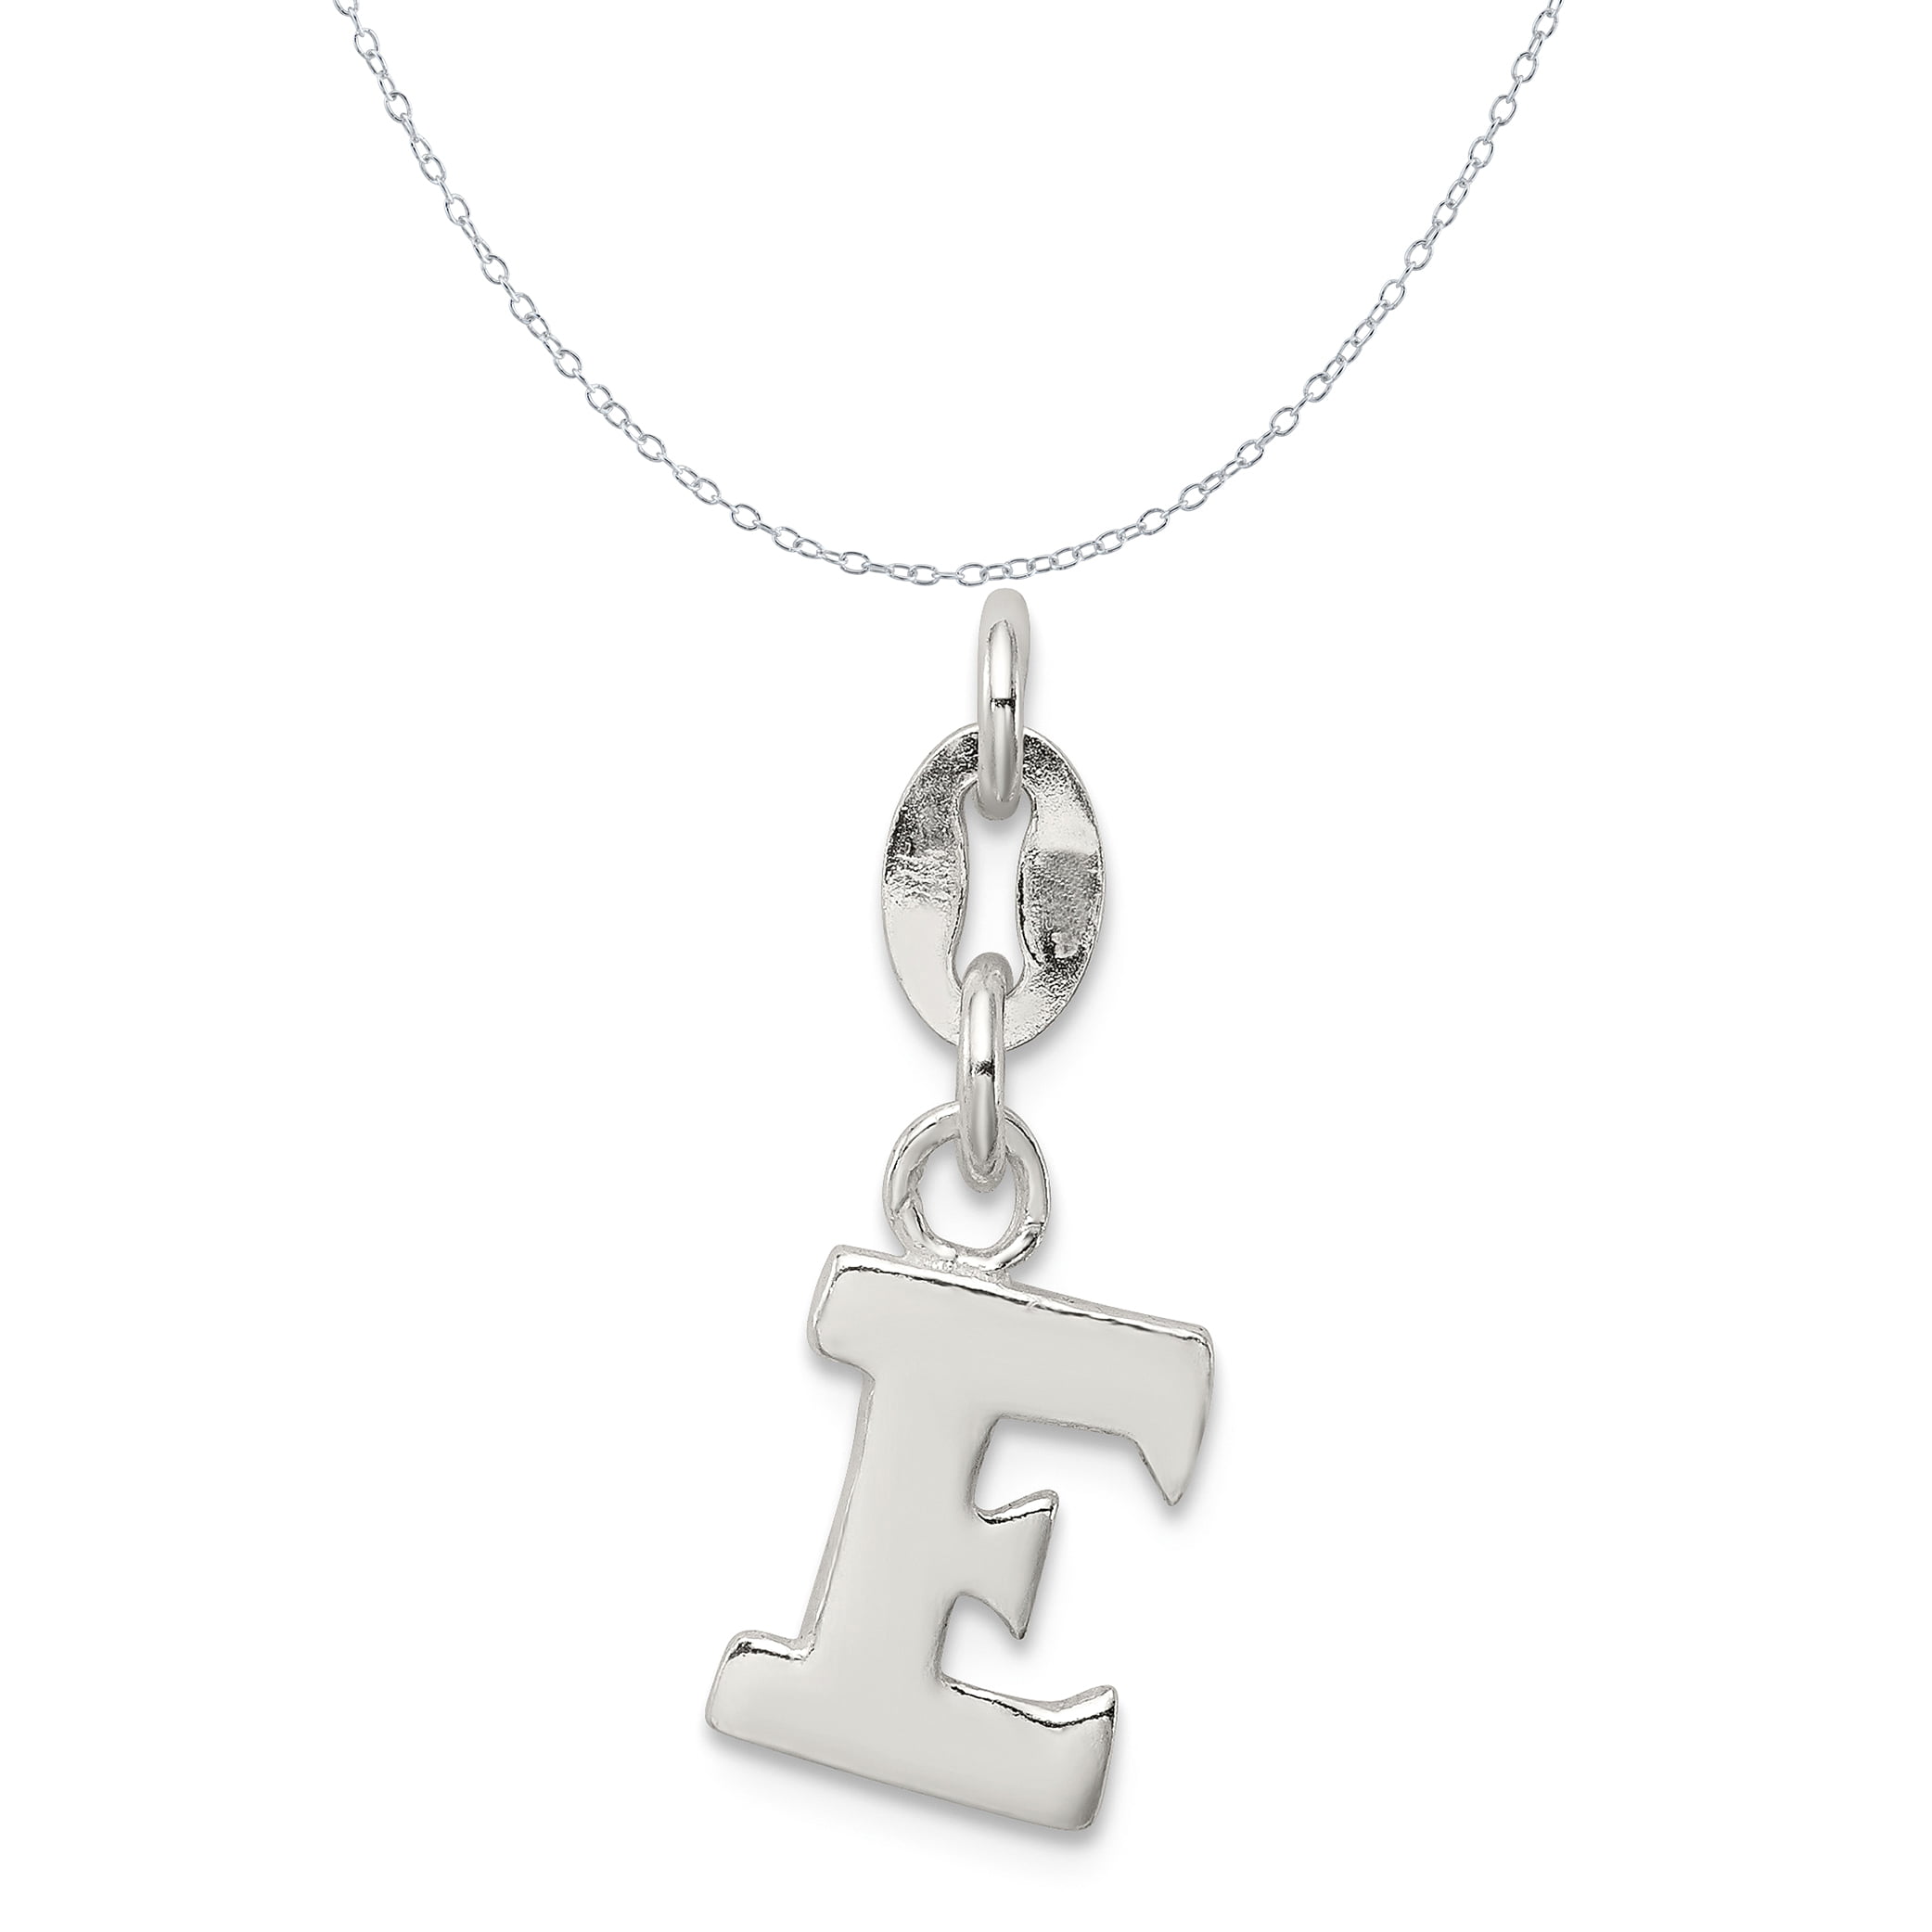 18 LavaFashion Sterling Silver Stamped Initial J Charm Necklace 